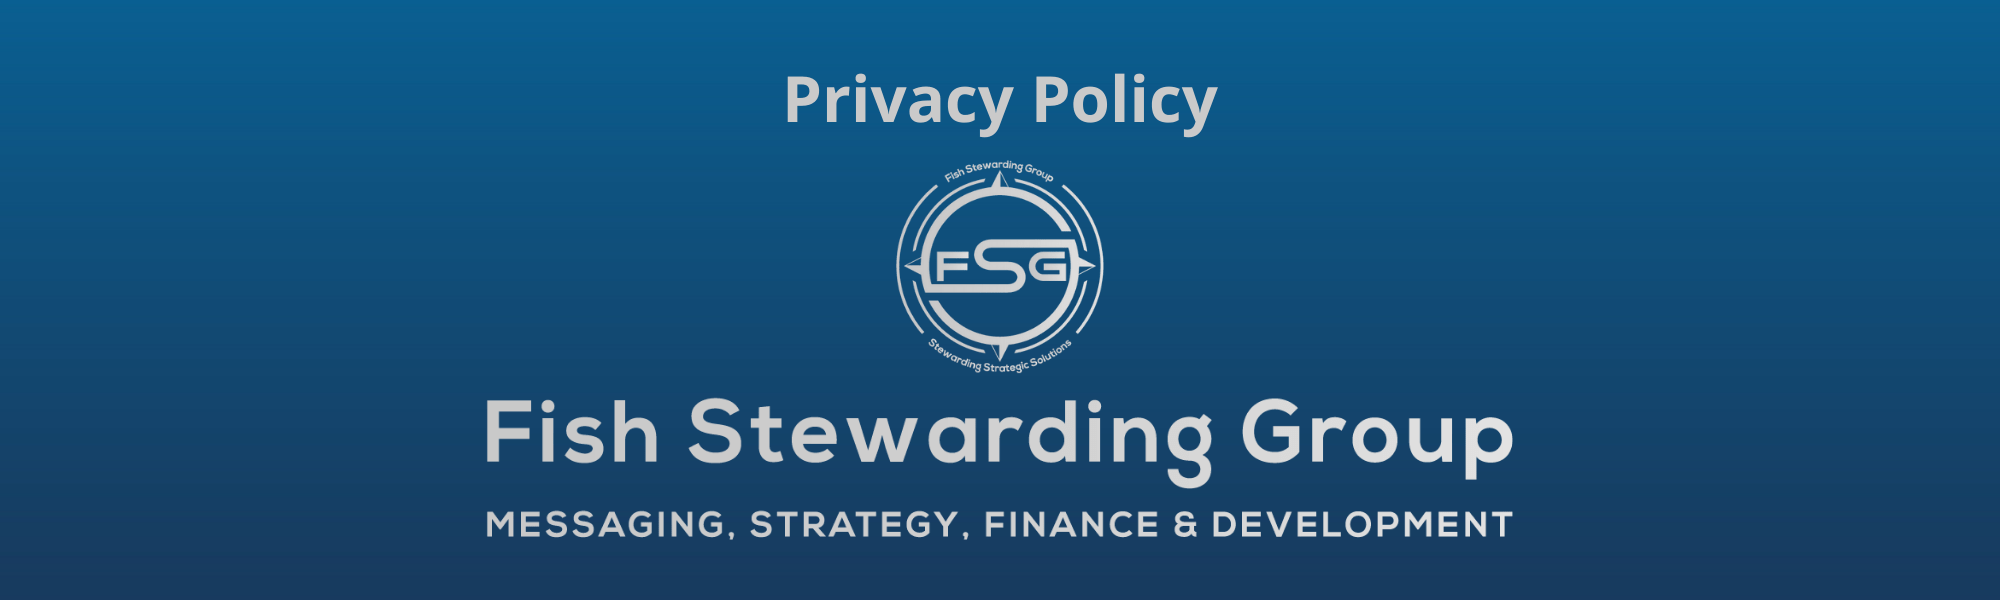 A thin rectangular Footer graphic for the Privacy Policy page. The background is a blue gradient color that goes from a dark blue on the bottom to a lighter blue on top. The text in gray on top reads Privacy Policy. The text in gray on the bottom center reads: Fish Stewarding Group and beneath that, the text reads Messaging, Strategy, Finance and Development. In the center above the text is the FSG logo in gray. The logo has the letters FSG in the middle with a circle with four pointed arrows facing north, south, east and west with the S connected to that circle. Four rounded lines make the next circle of the circle and the last layer is a thin circle with the text on the Bottom that reads Stewarding Strategist Solutions and on top, the text reads Fish Stewarding Group.